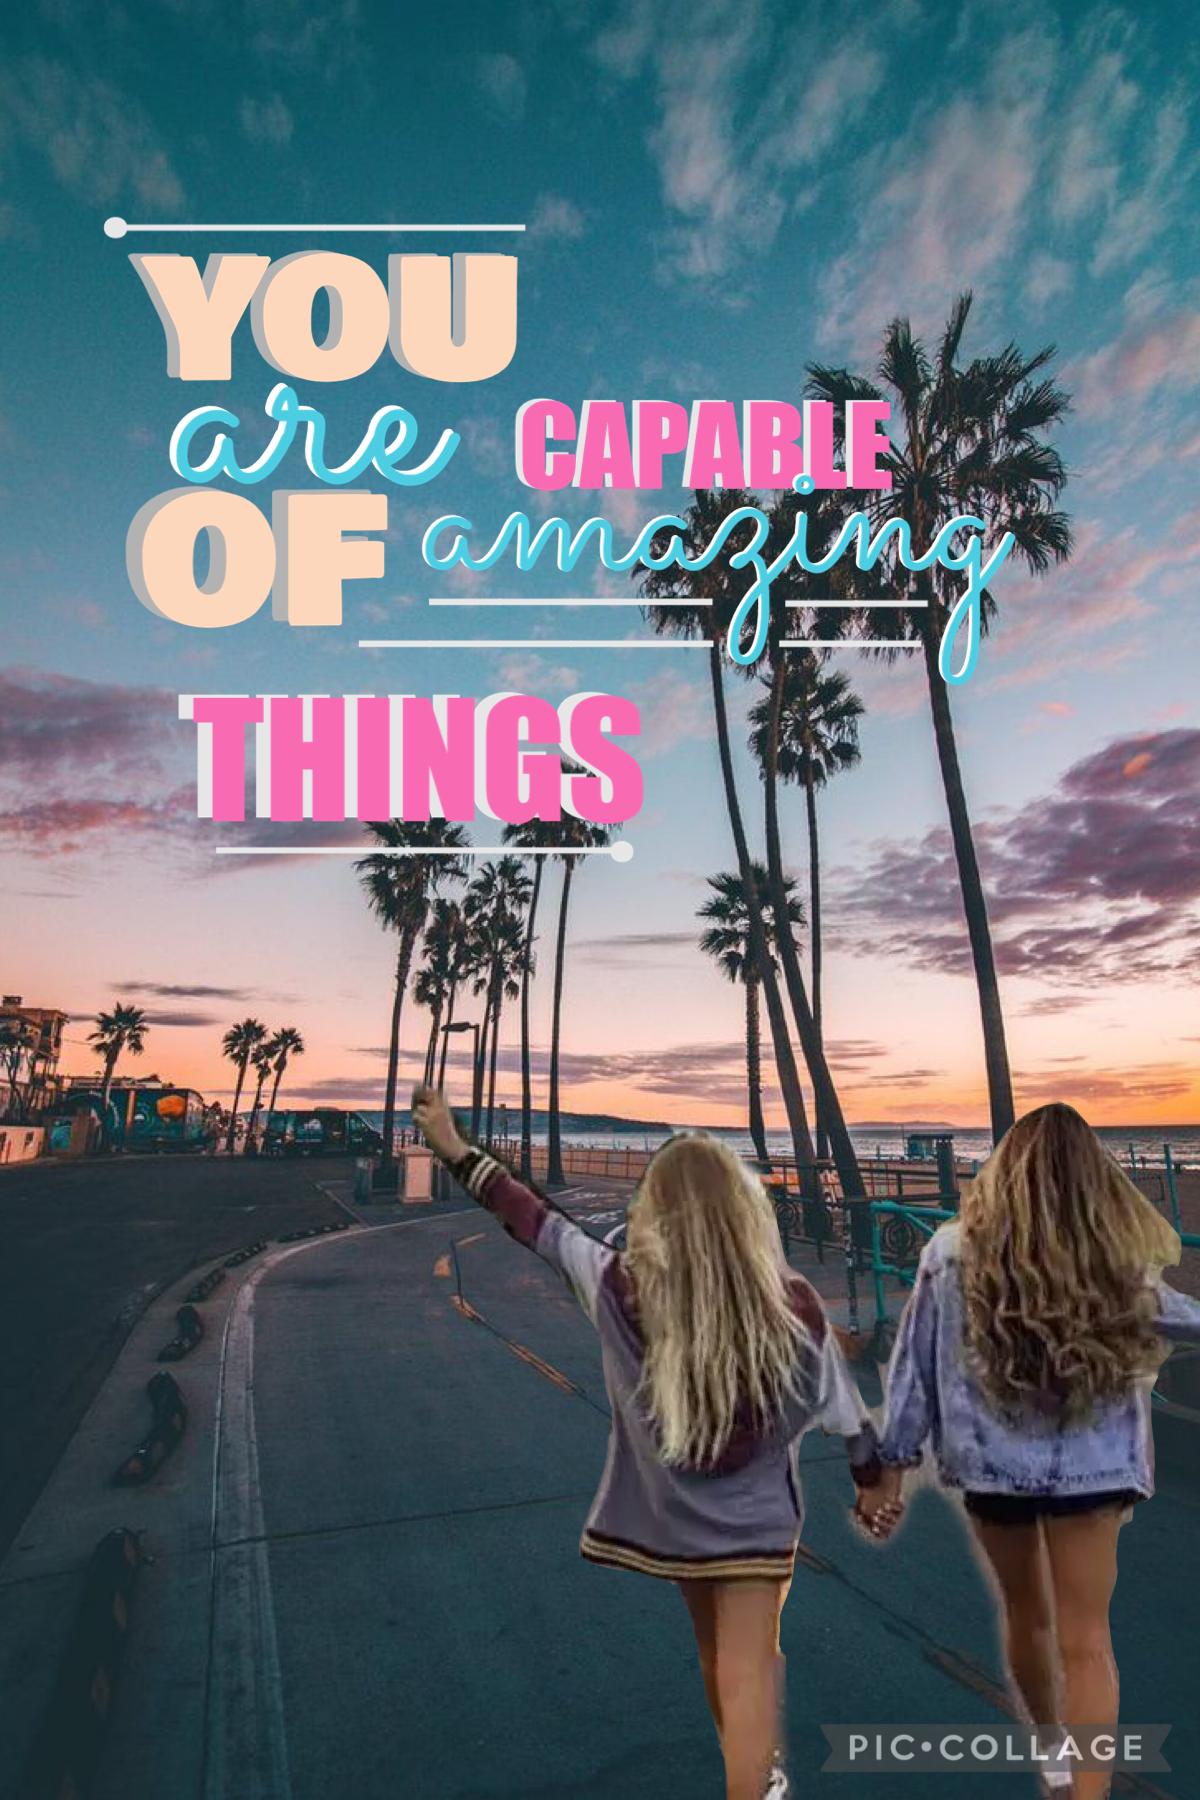 💖Tap💖
You are capable of amazing things